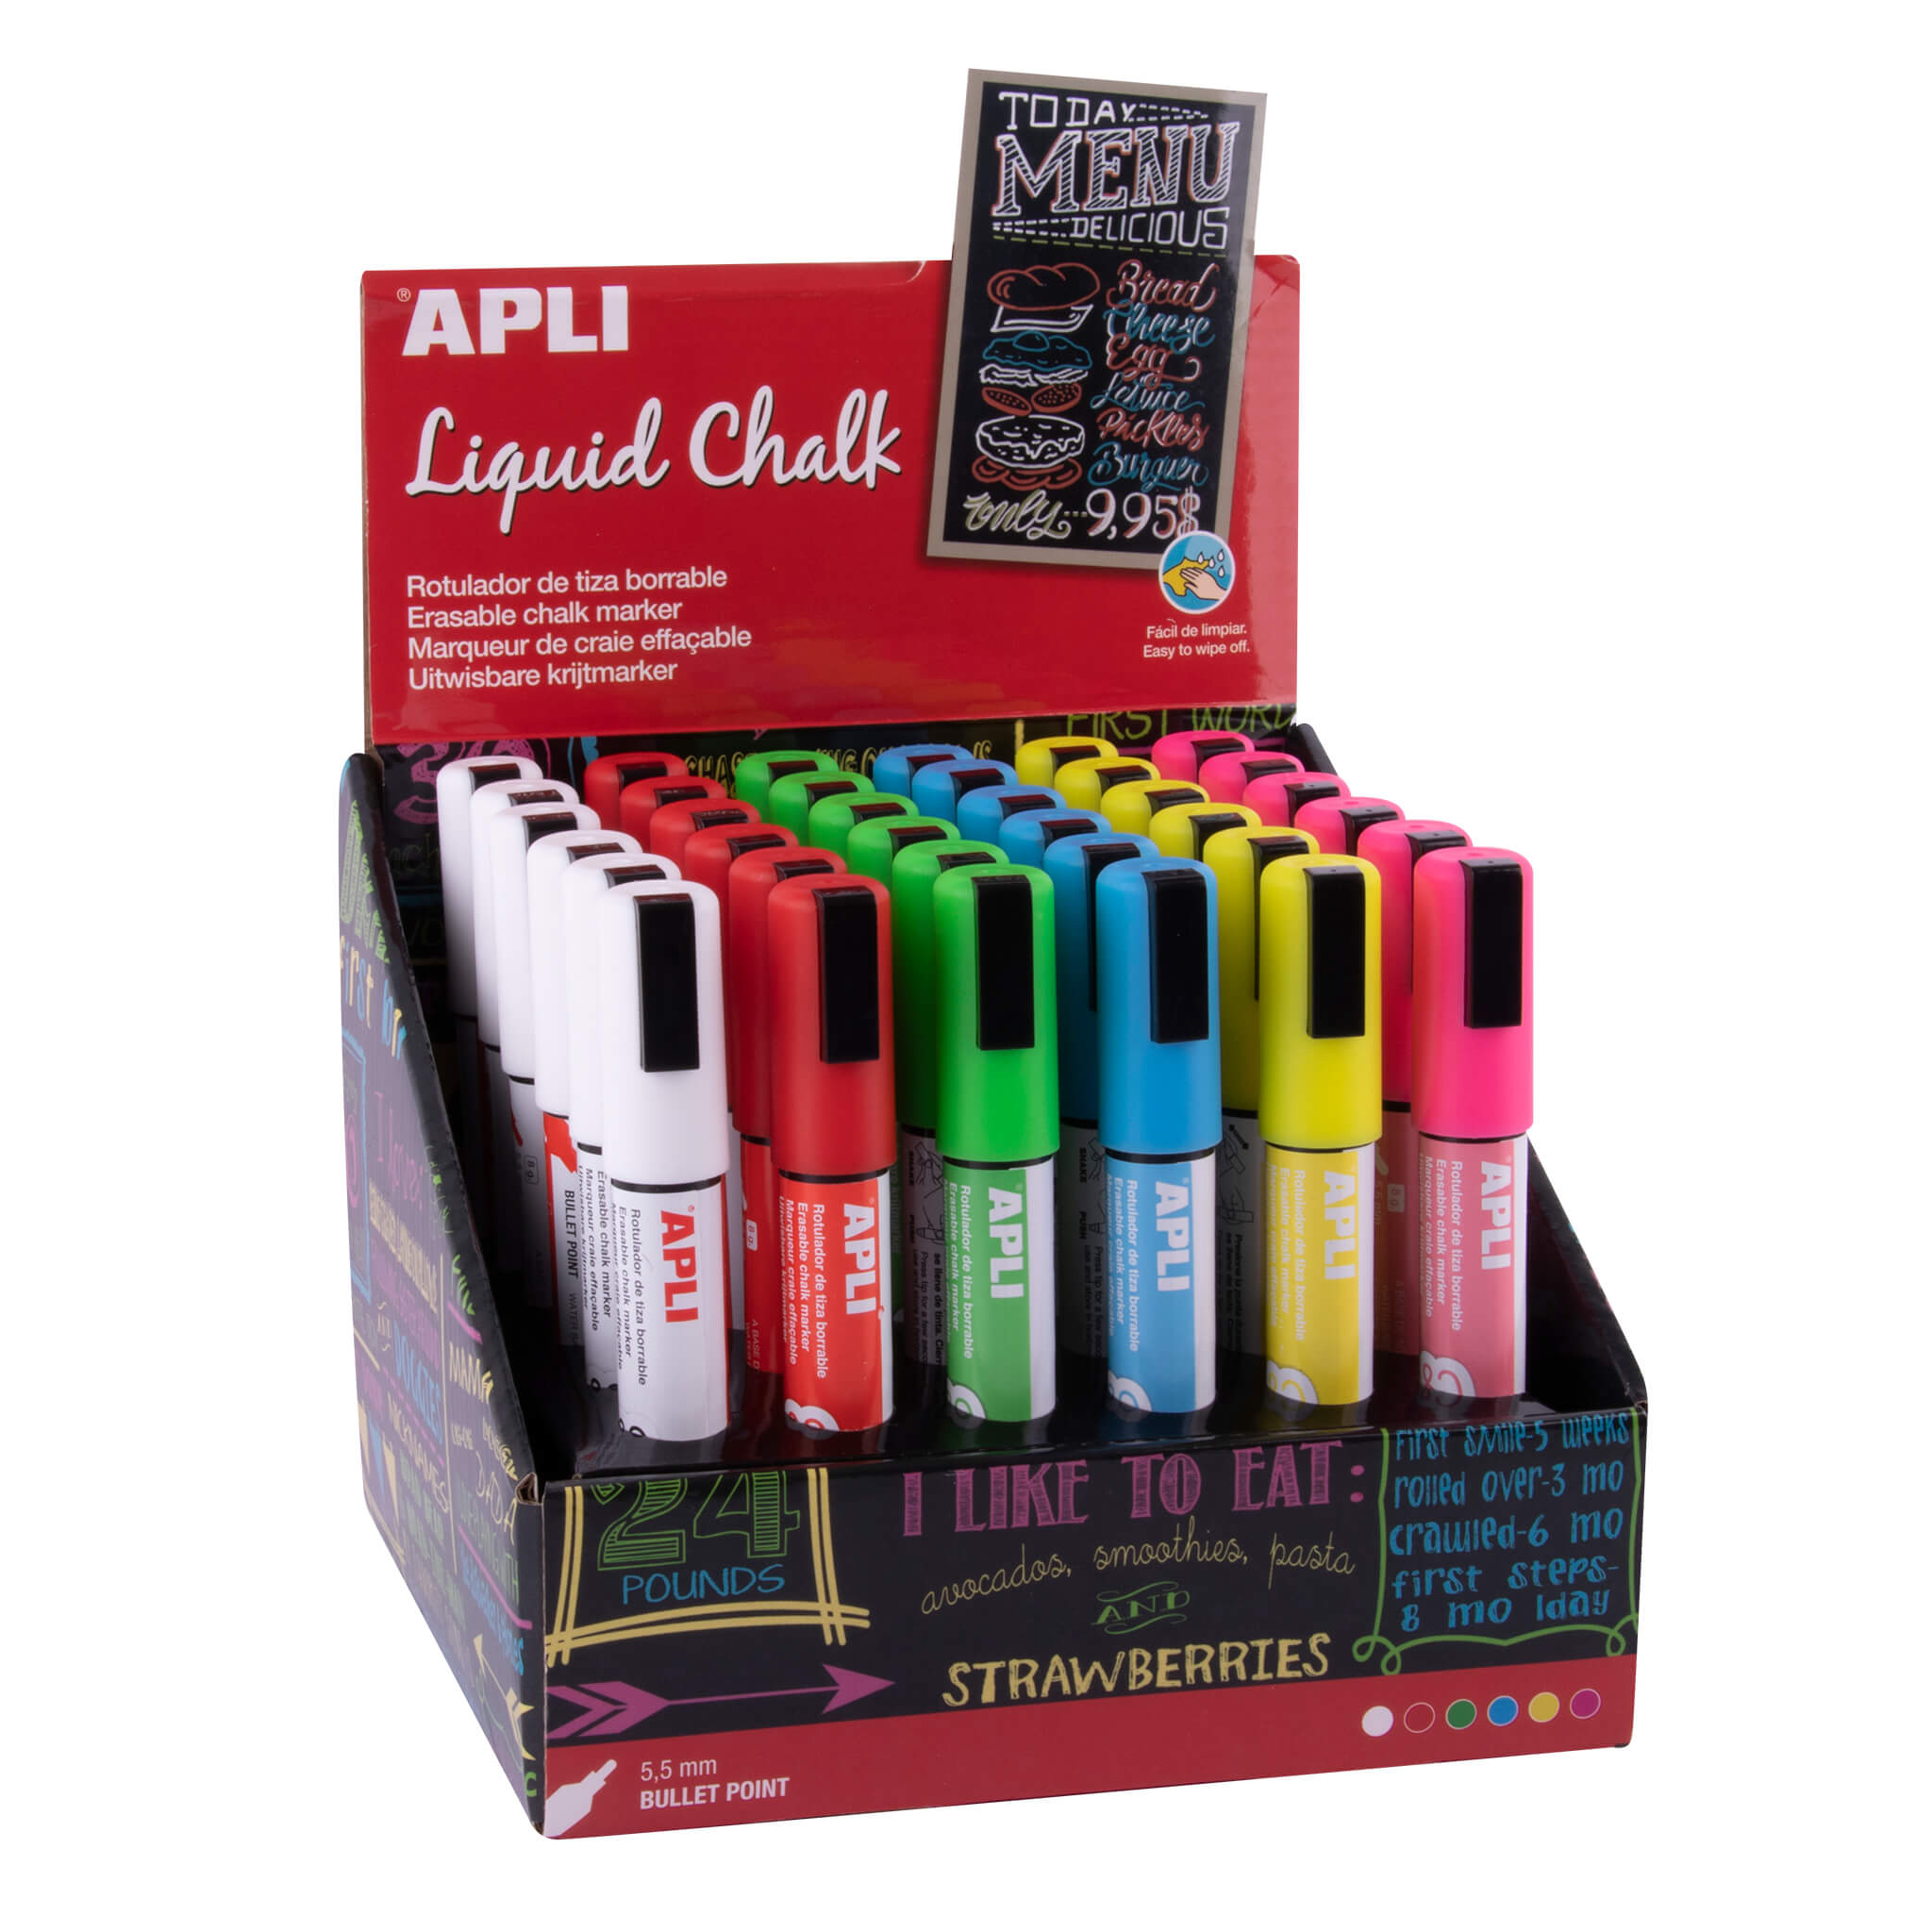 Design a product label for pastel liquid chalk markers